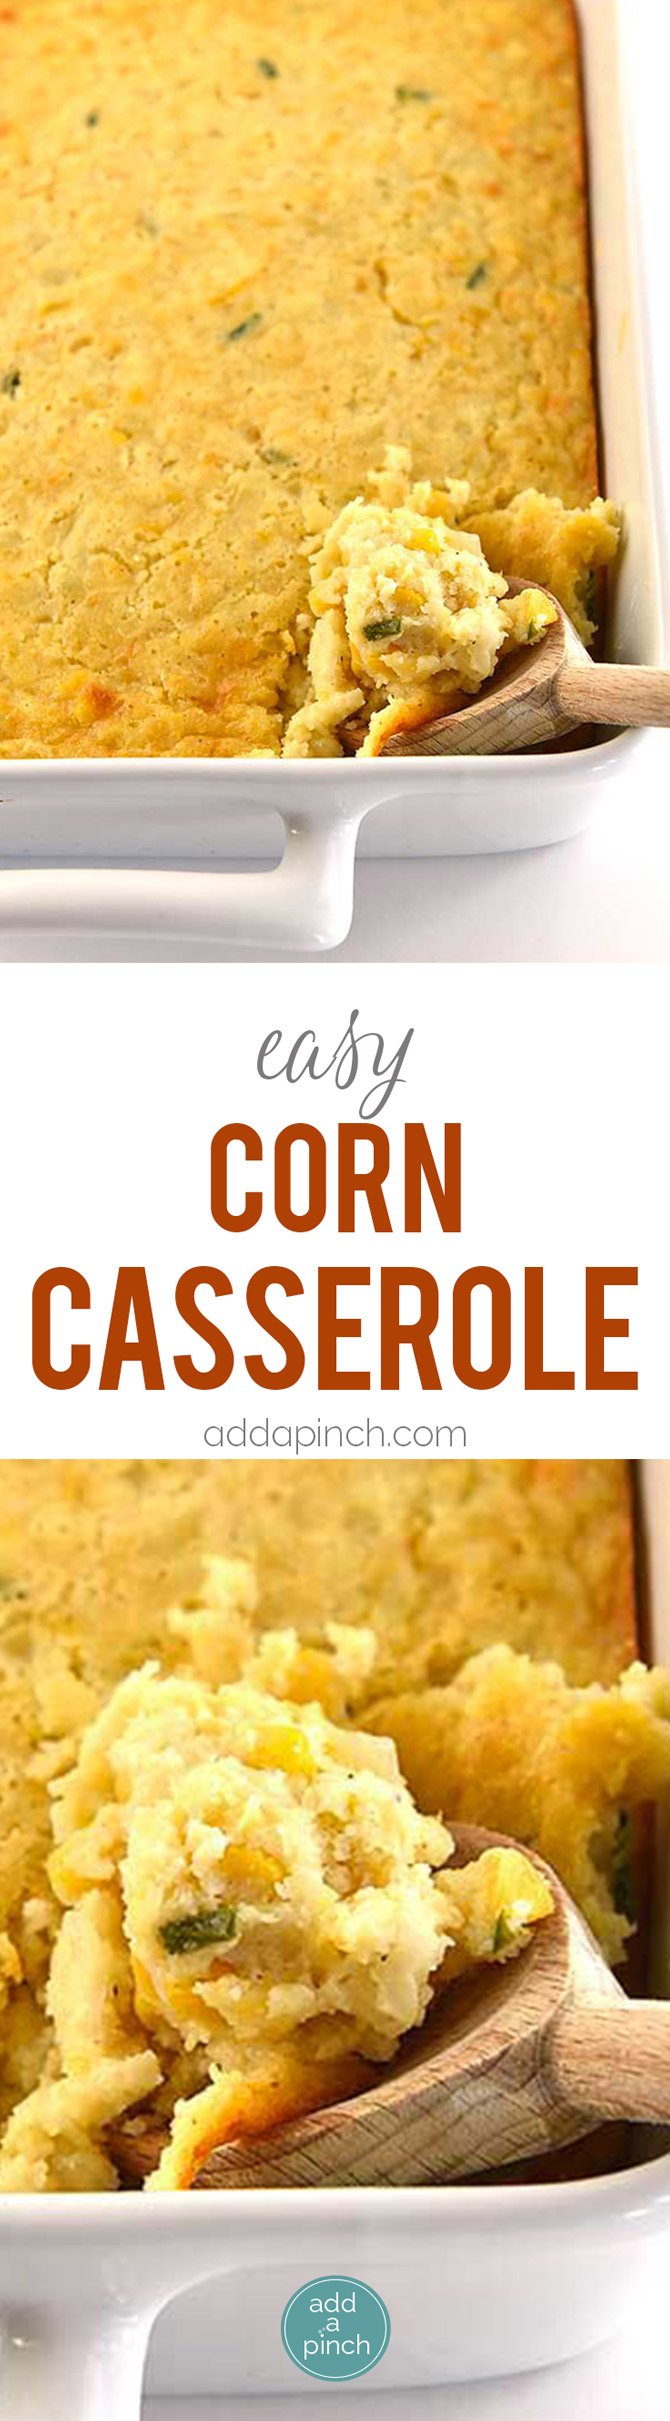 Corn Casserole Recipe - Corn casserole makes a comforting classic casserole! Made of creamed and whole corn, this corn casserole comes together quickly and makes a favorite side dish! // addapinch.com